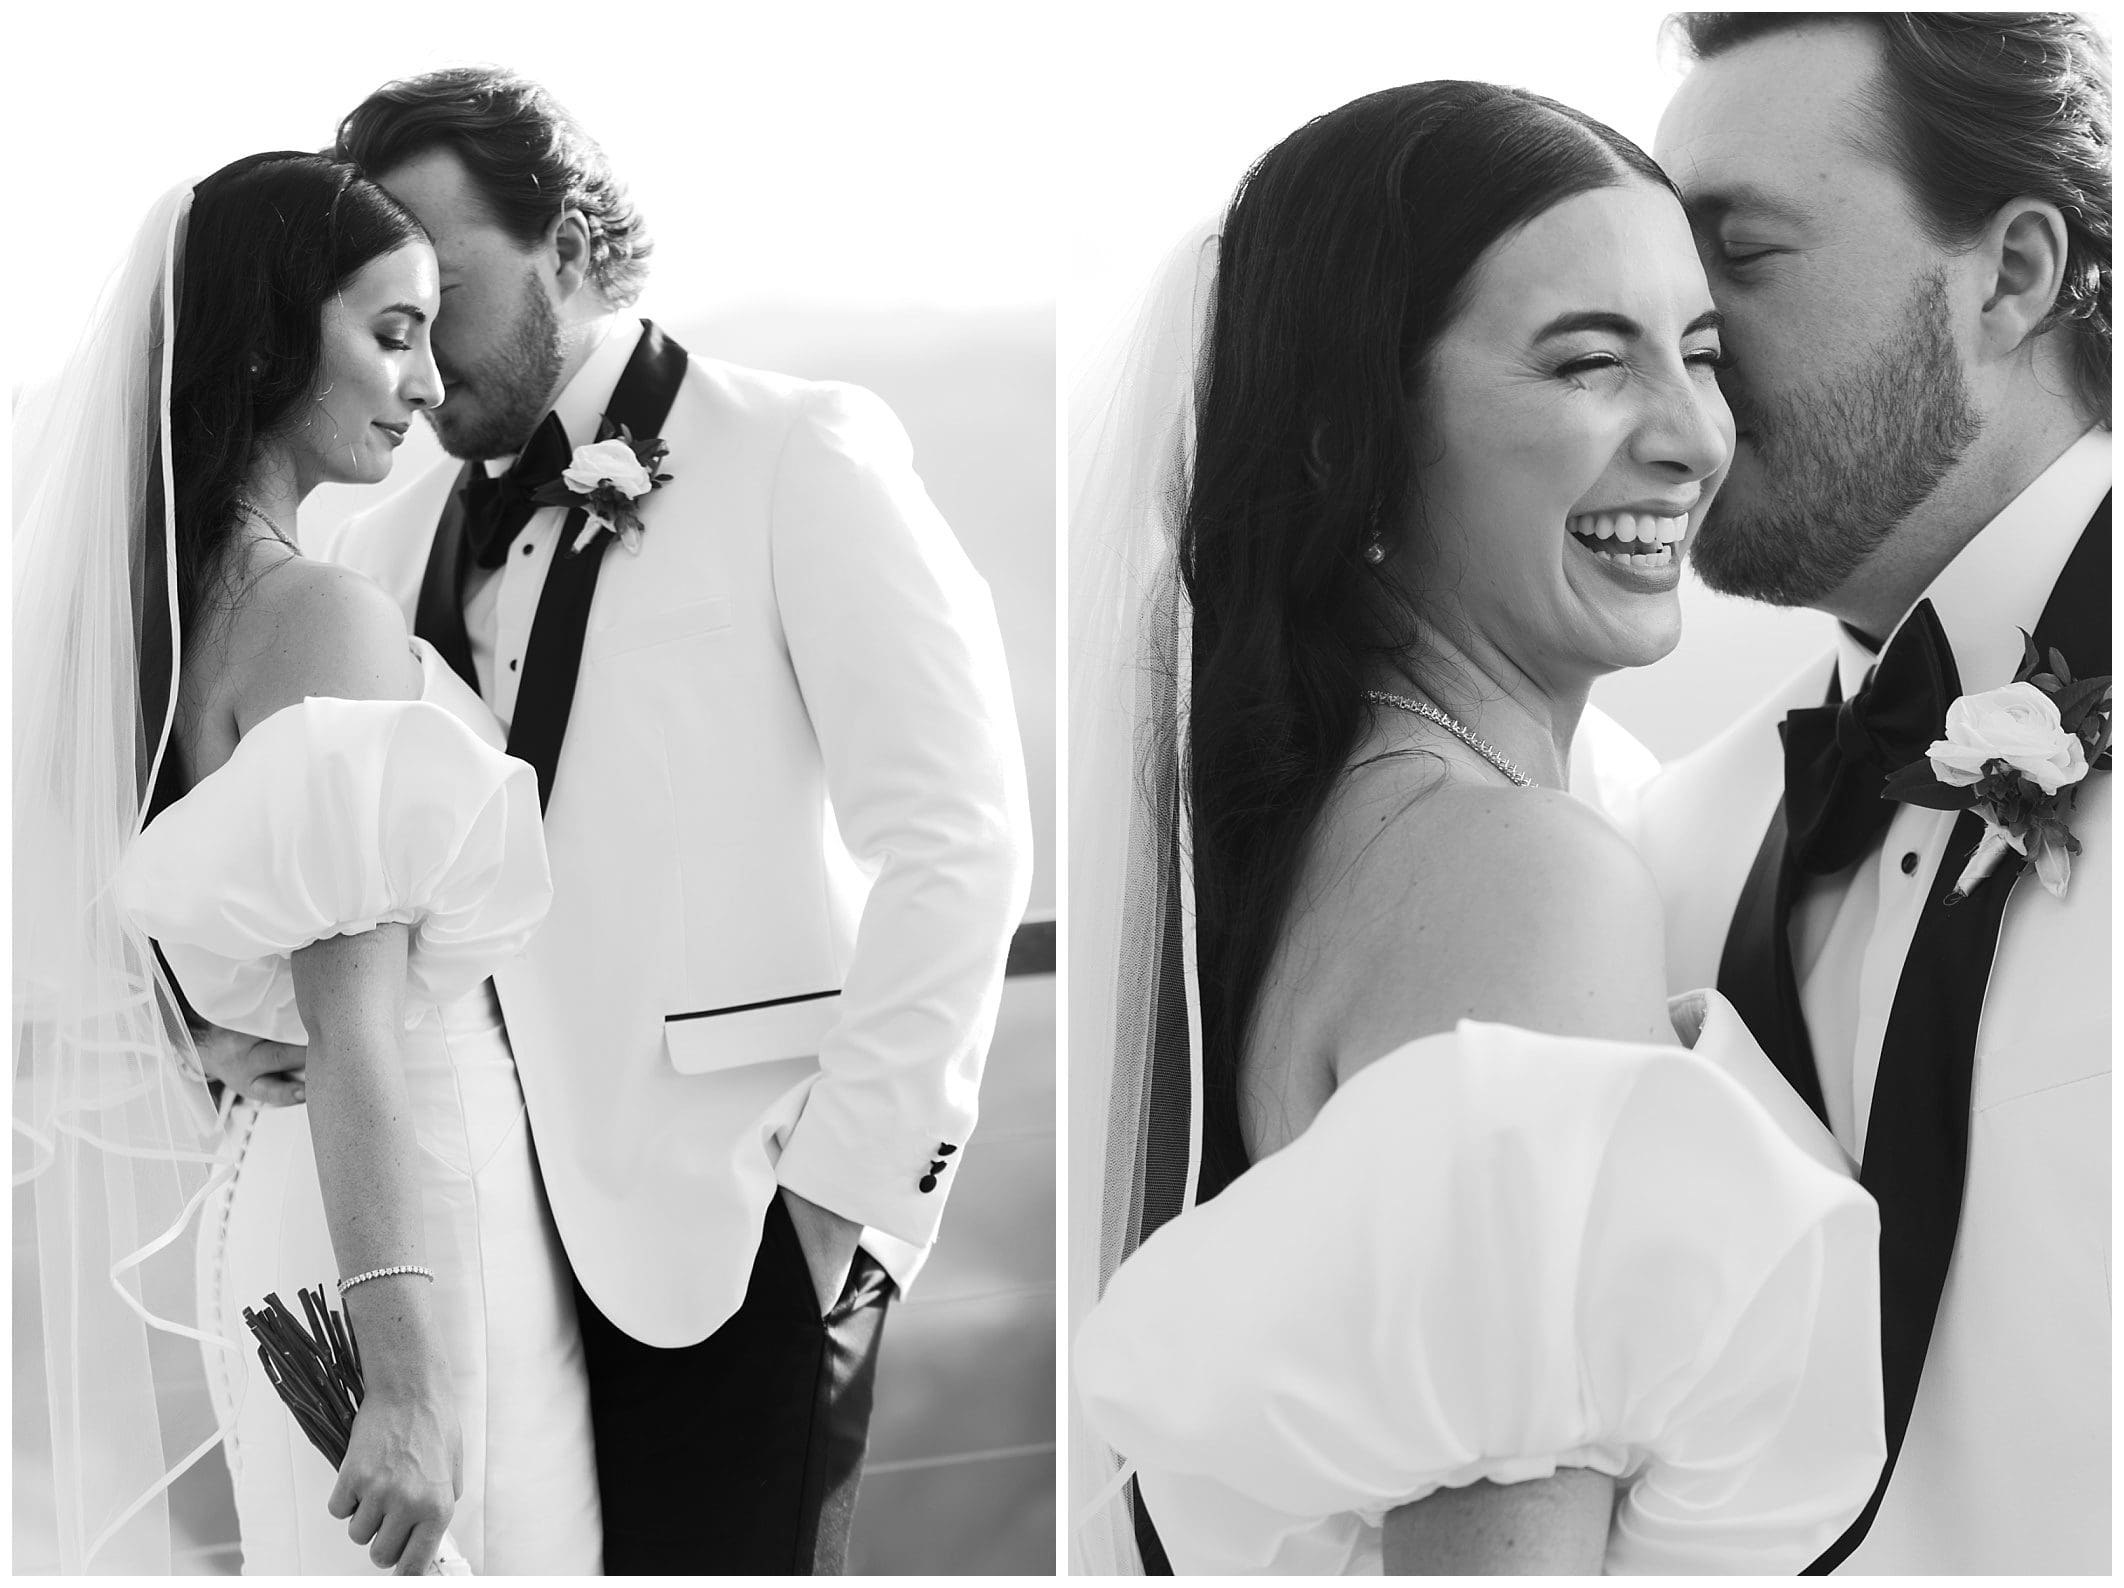 A black and white photo diptych of a newlywed couple embracing and smiling on their wedding day, the bride and groom dressed in elegant white attire.